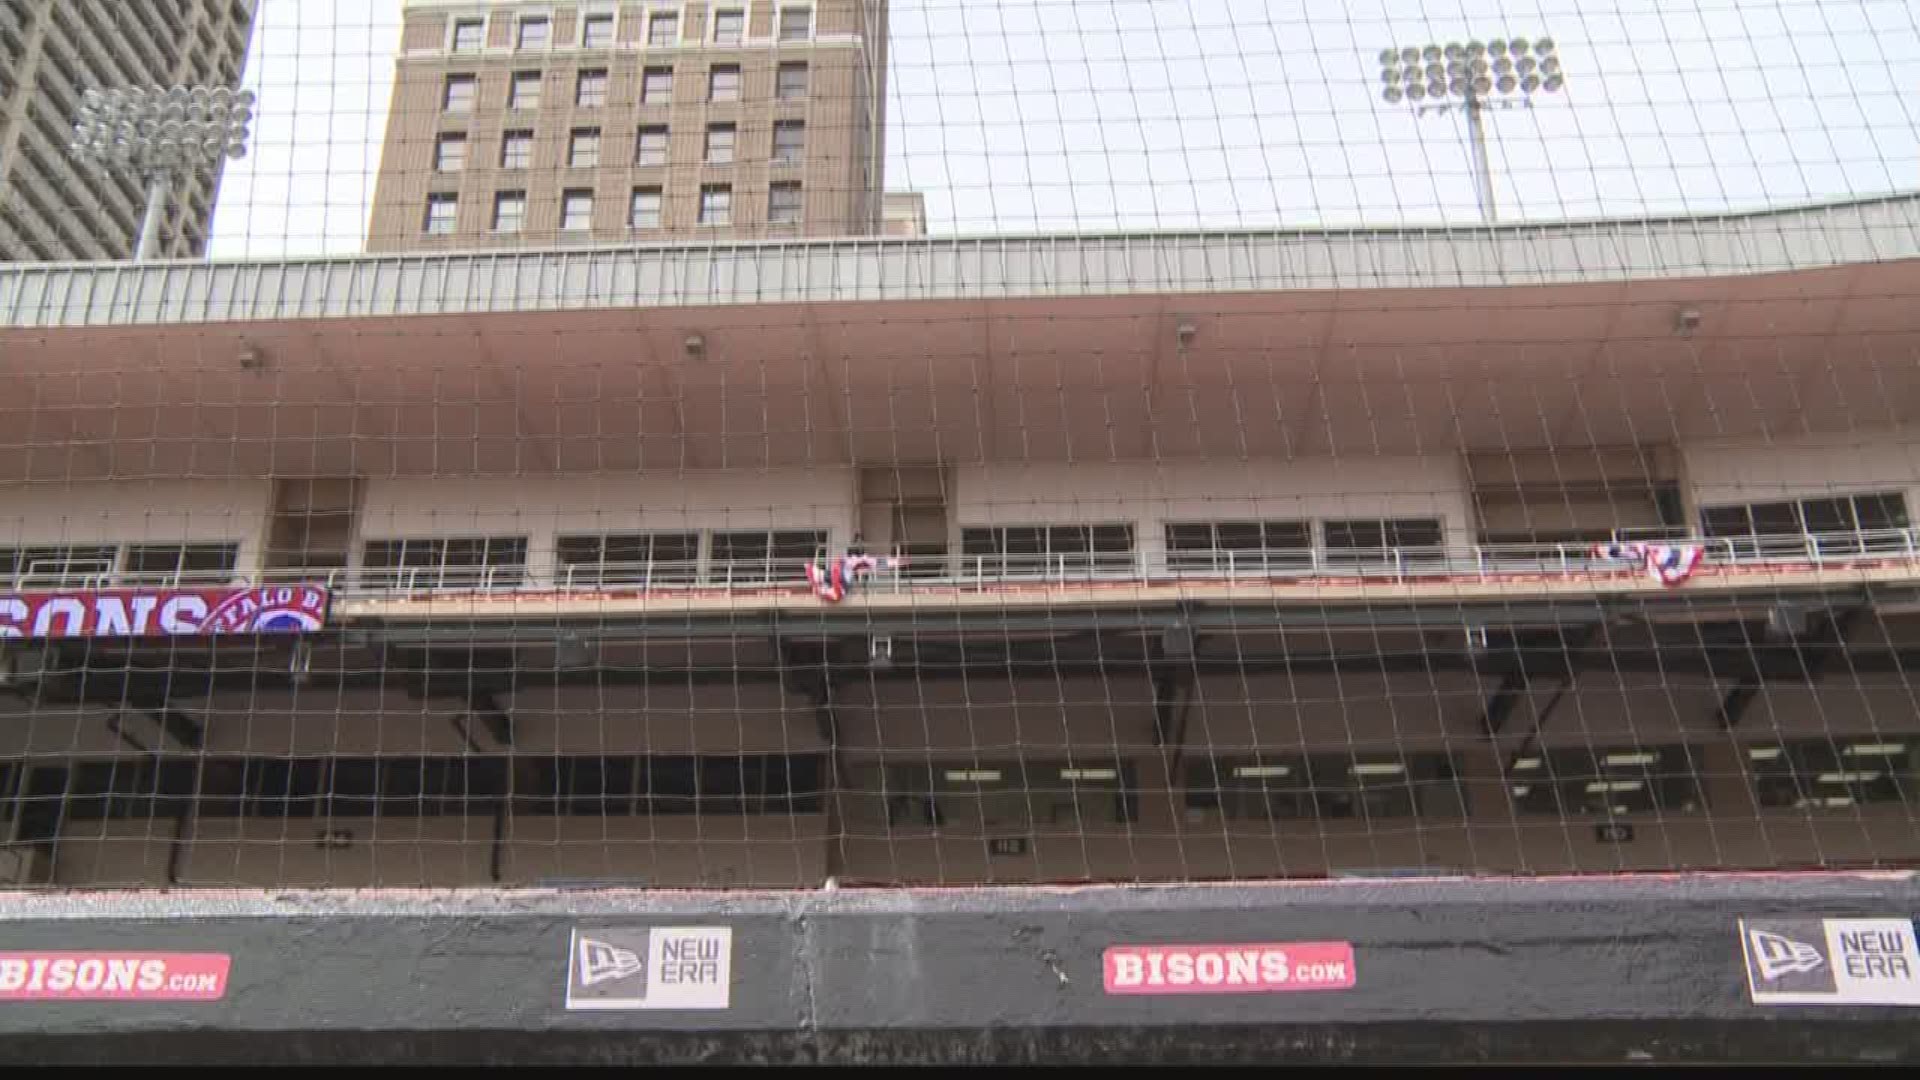 The Buffalo Bisons announced that their scheduled games on Thursday, April 6 and Friday, April 7 against the Scranton/Wilkes-Barre RailRiders have been postponed due to weather.